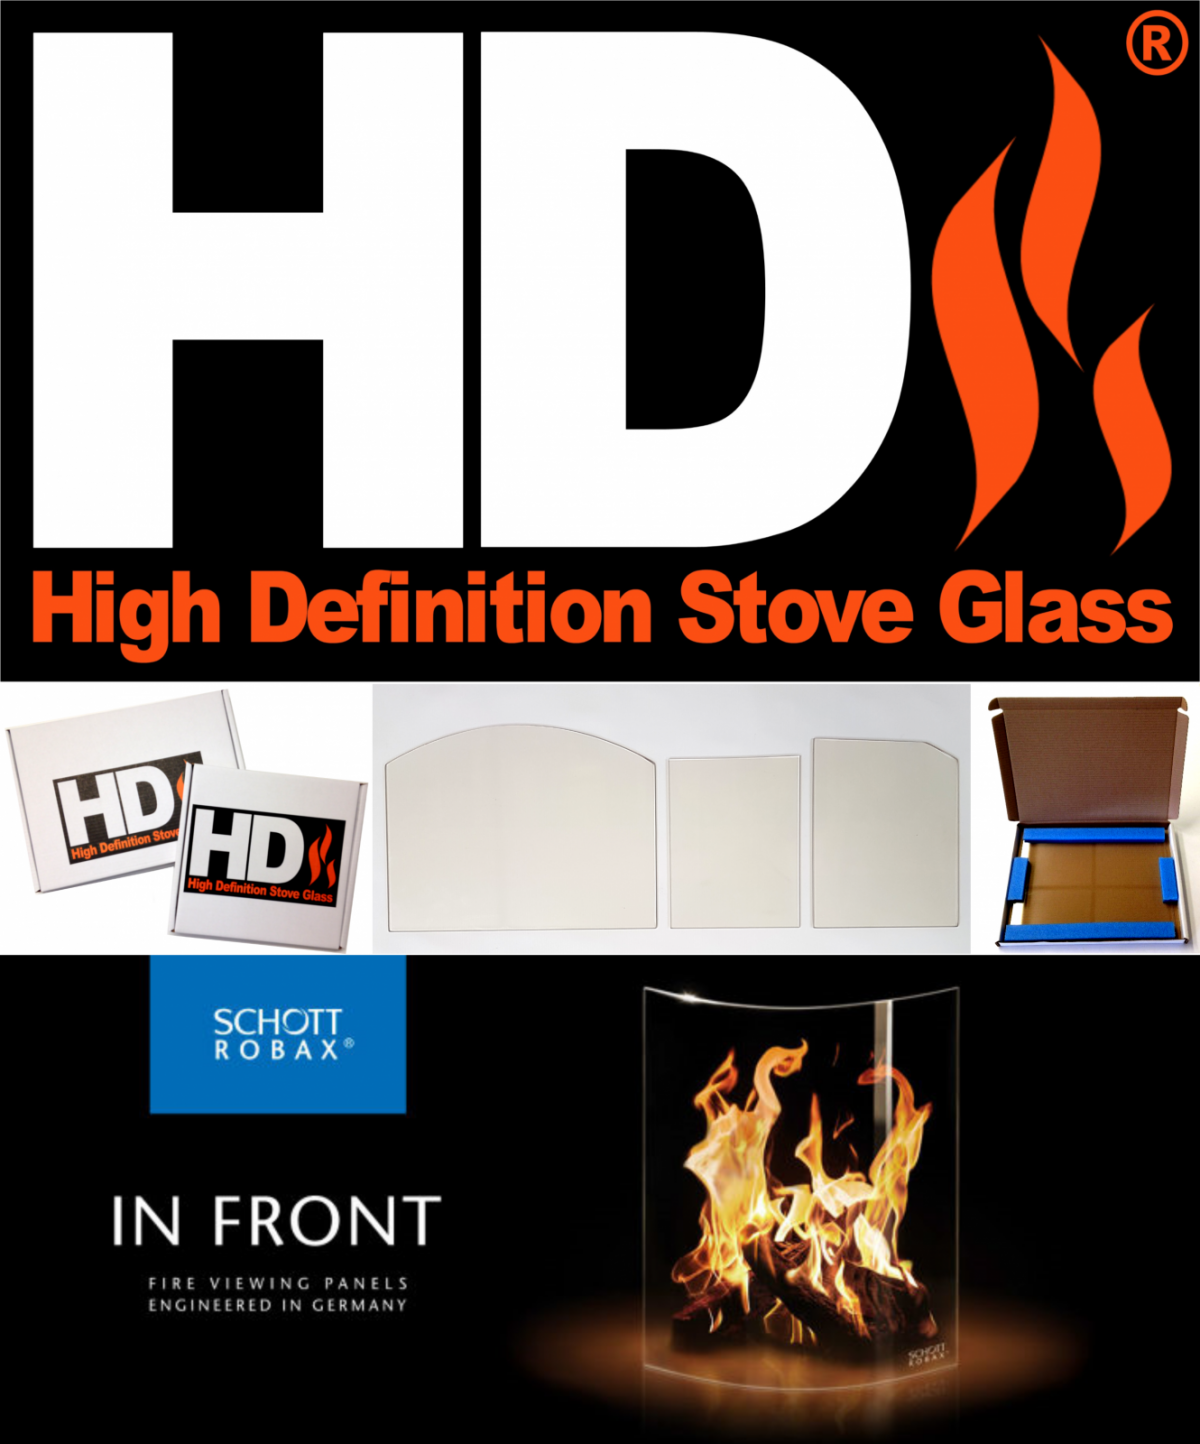 High Definition Stove Glass for the Gallery/Evergreen Firefox 12 Double Door Model